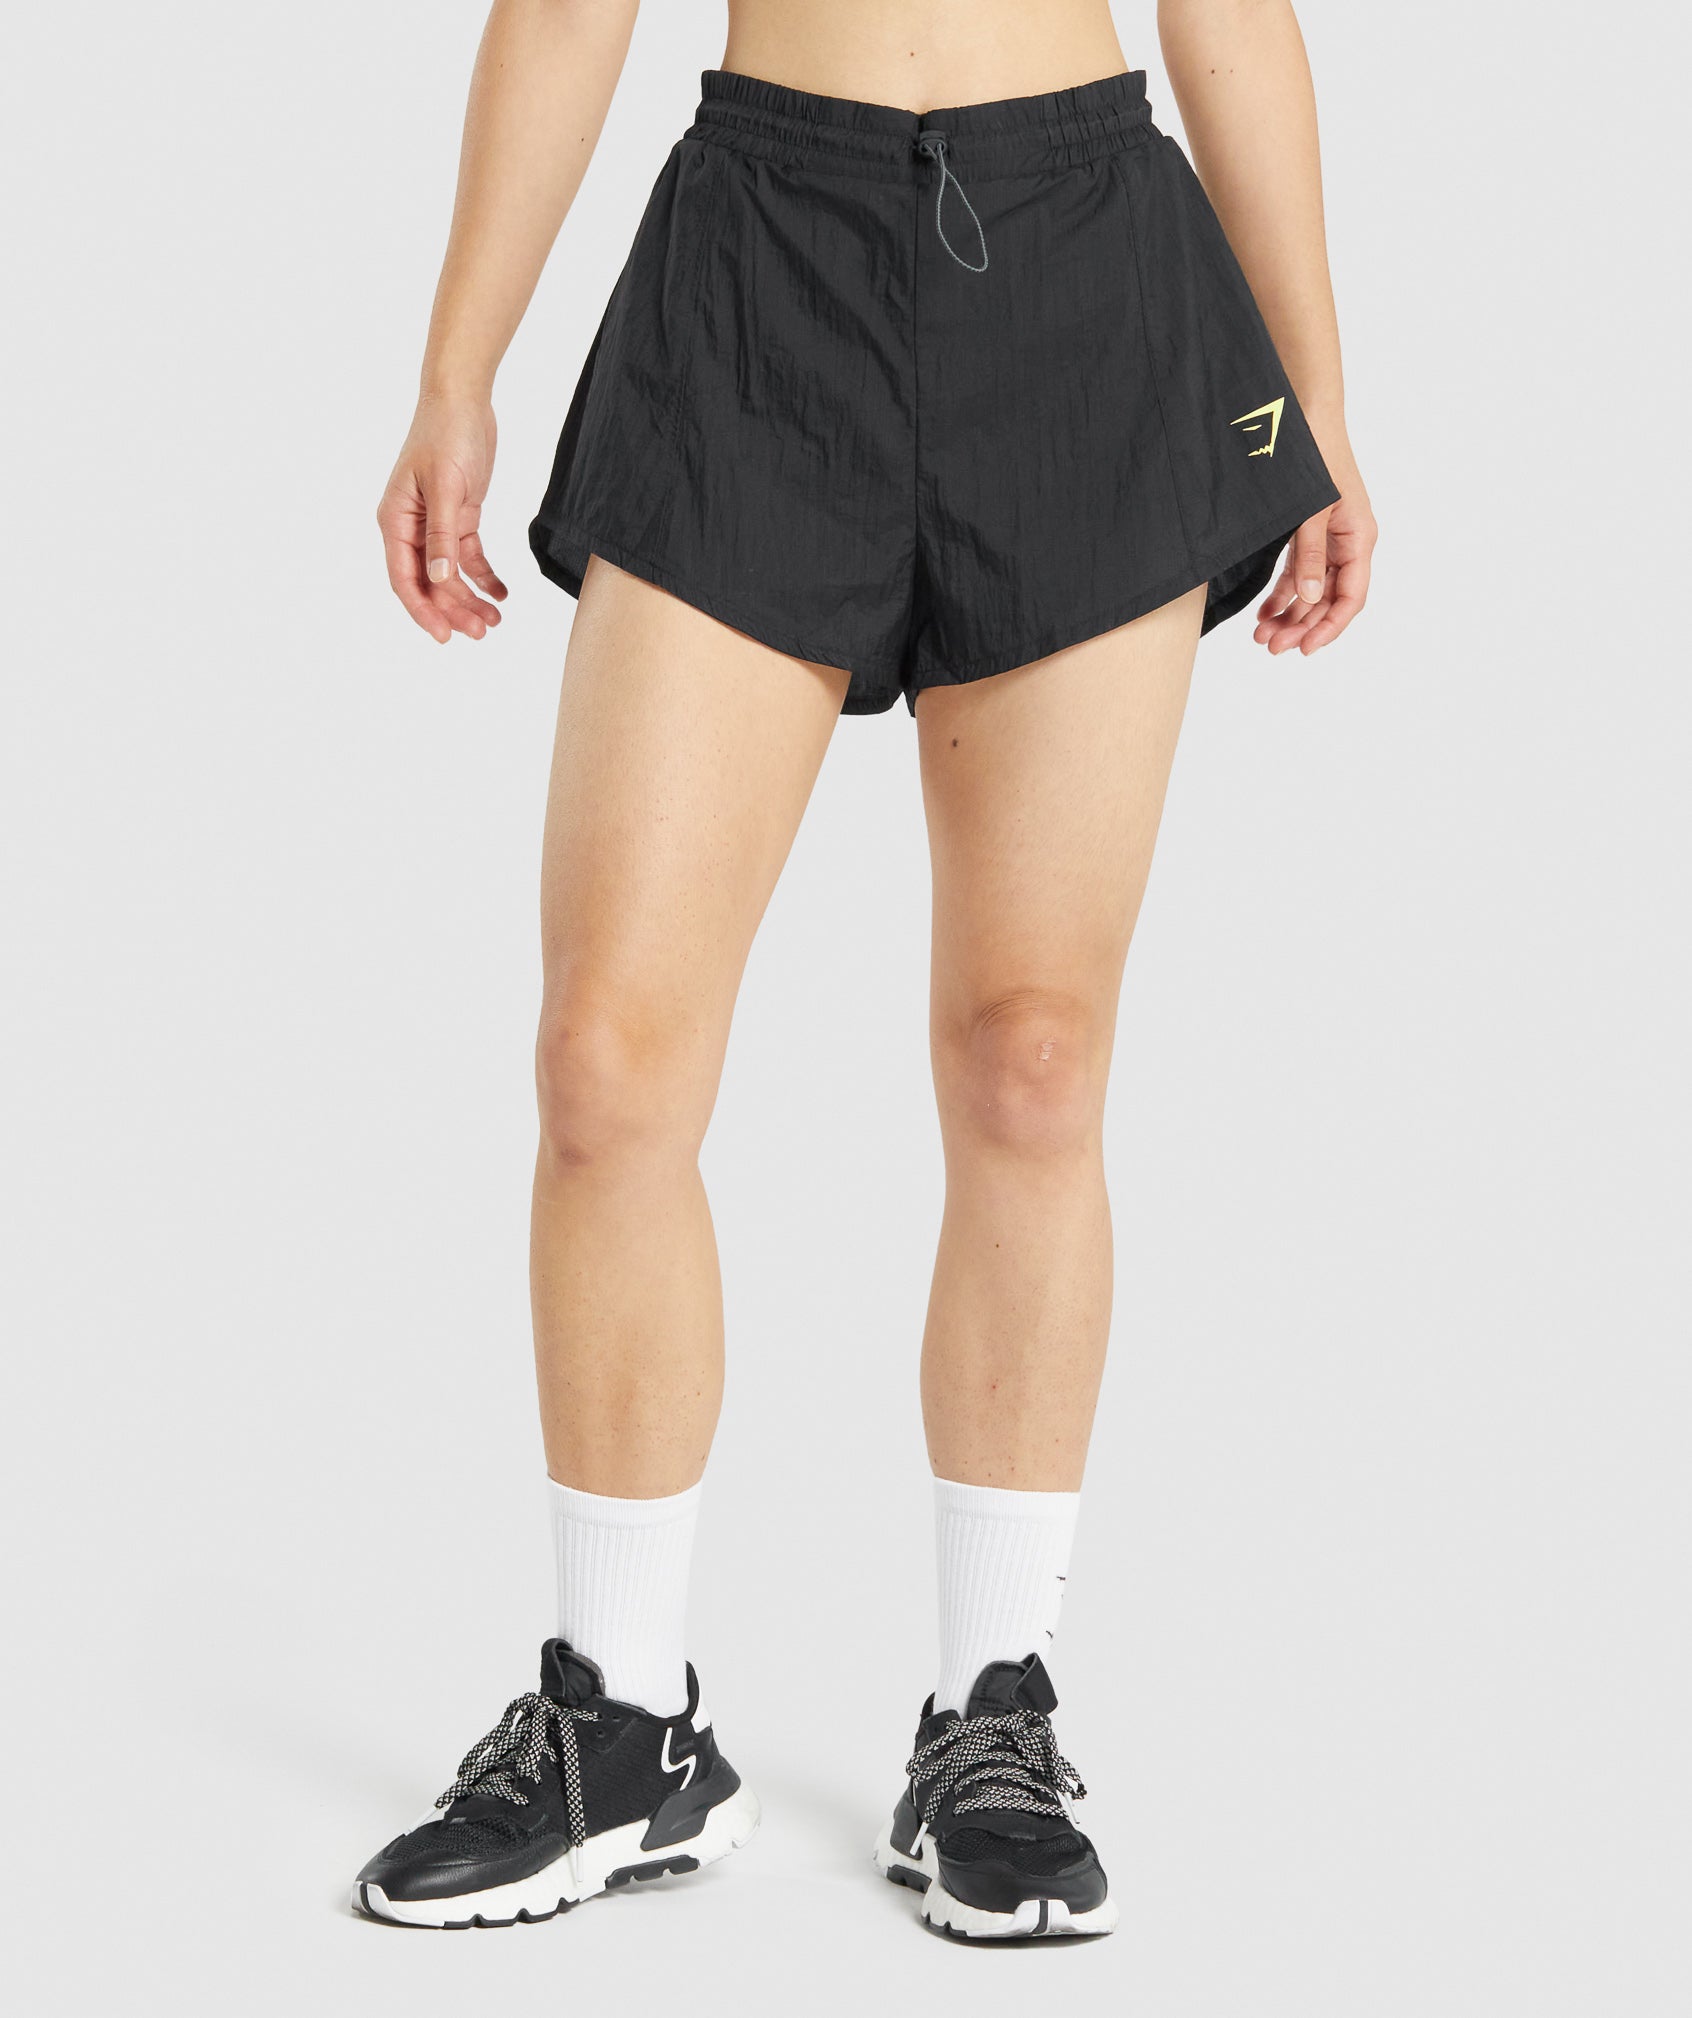 Pulse 2 in 1 Shorts in Black - view 1